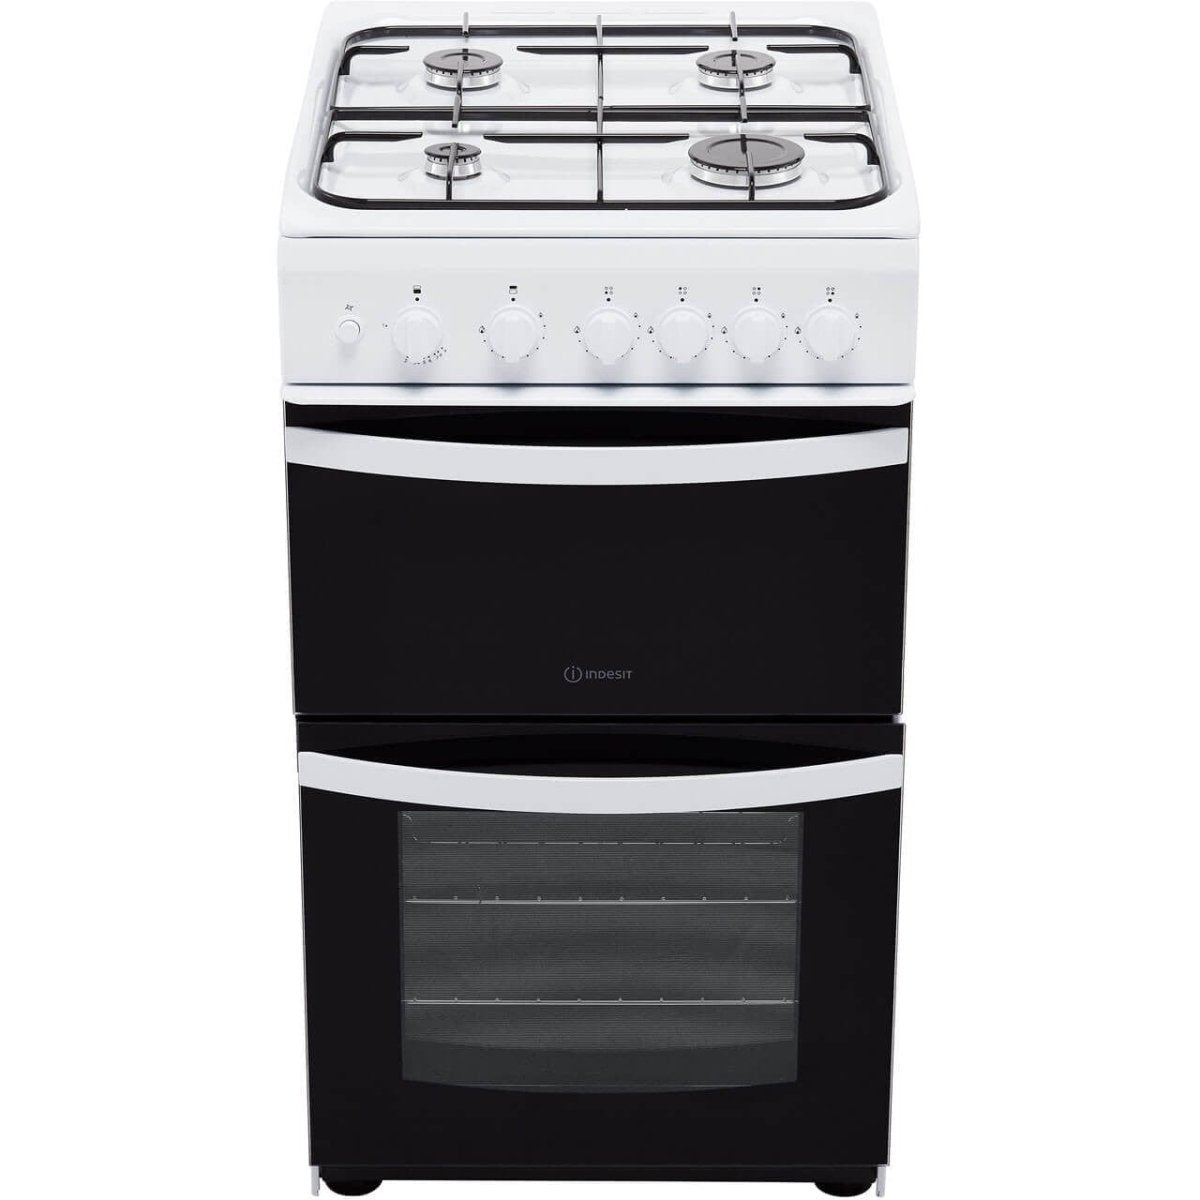 Indesit Cloe ID5G00KMW 50cm Gas Cooker with Full Width Gas Grill - White - A Rated | Atlantic Electrics